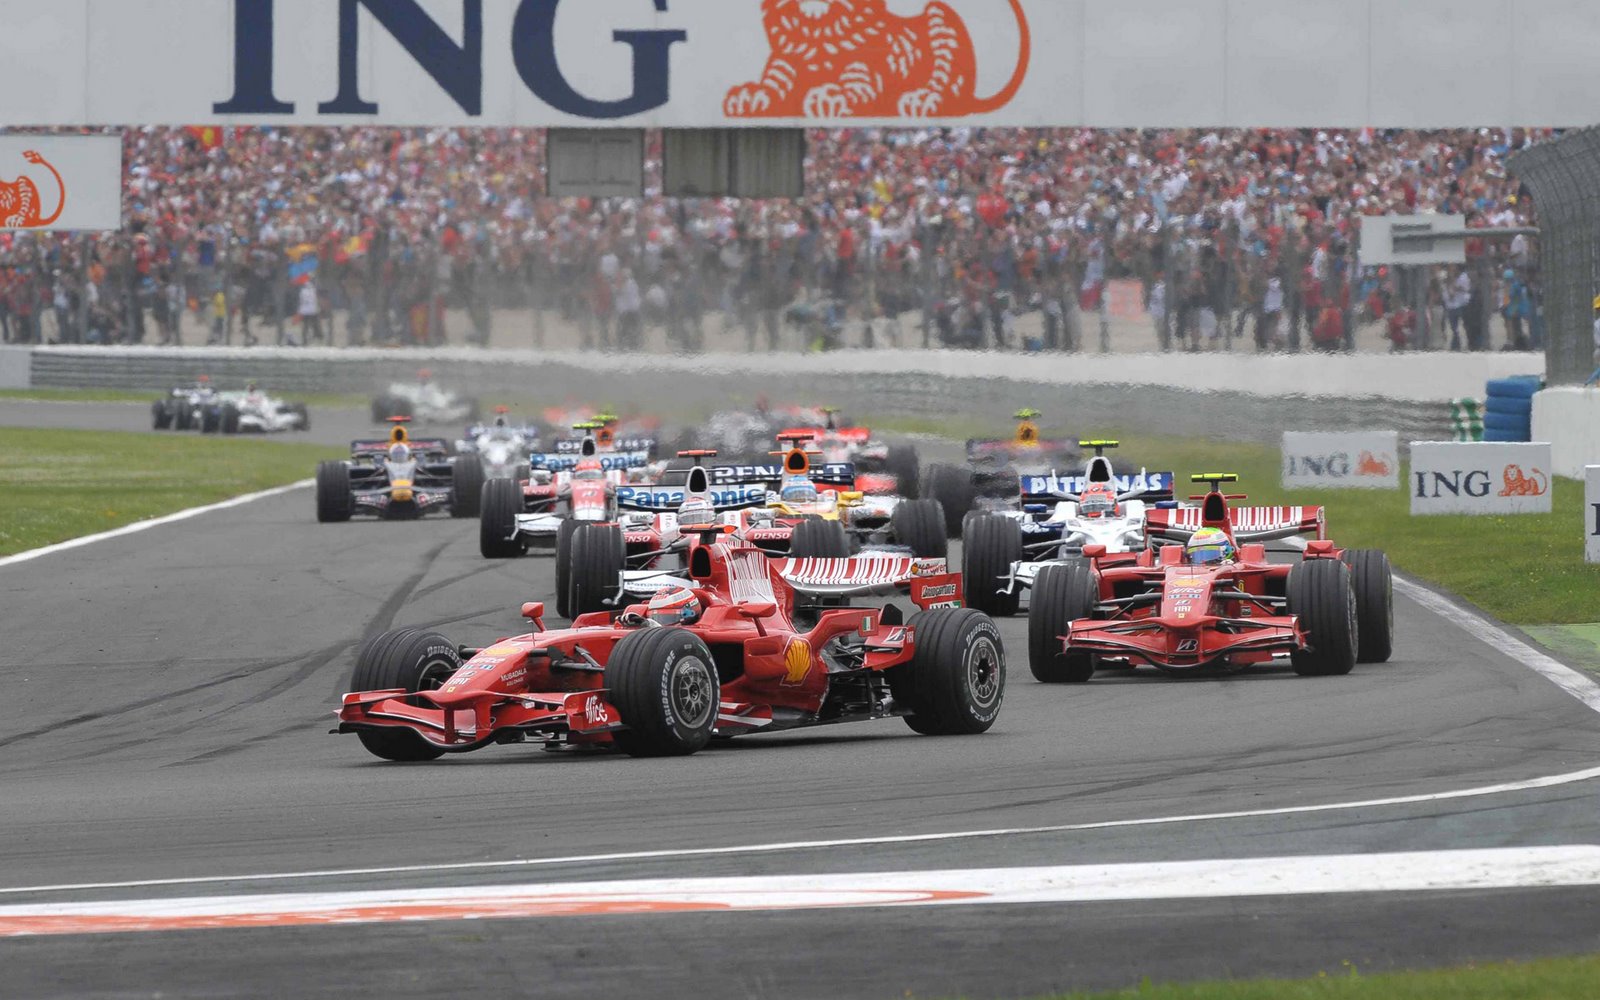 [Sunday+Race+in+France+Magny+Cours,+F1+2008+88.jpg]